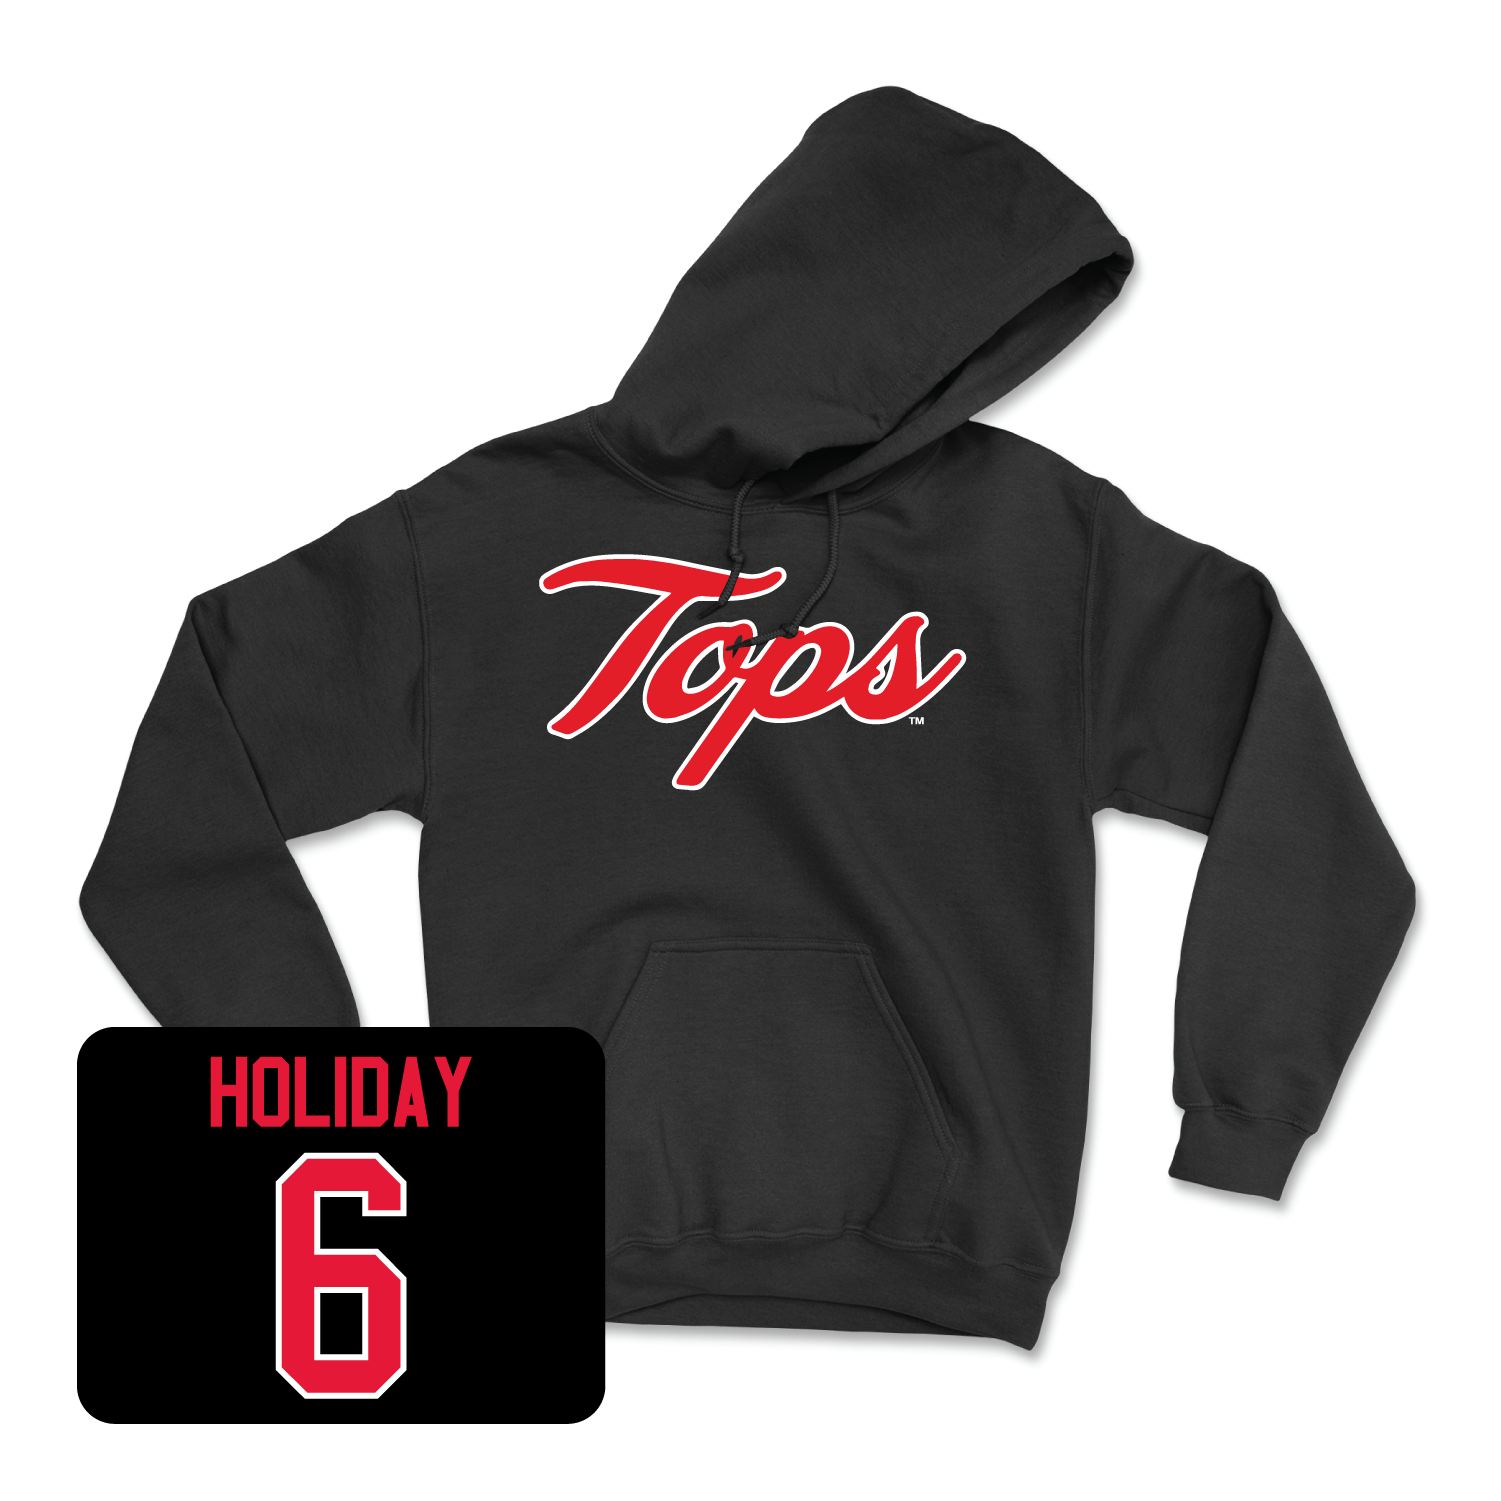 Black Football Tops Hoodie 3 4X-Large / Jimmy Holiday | #6